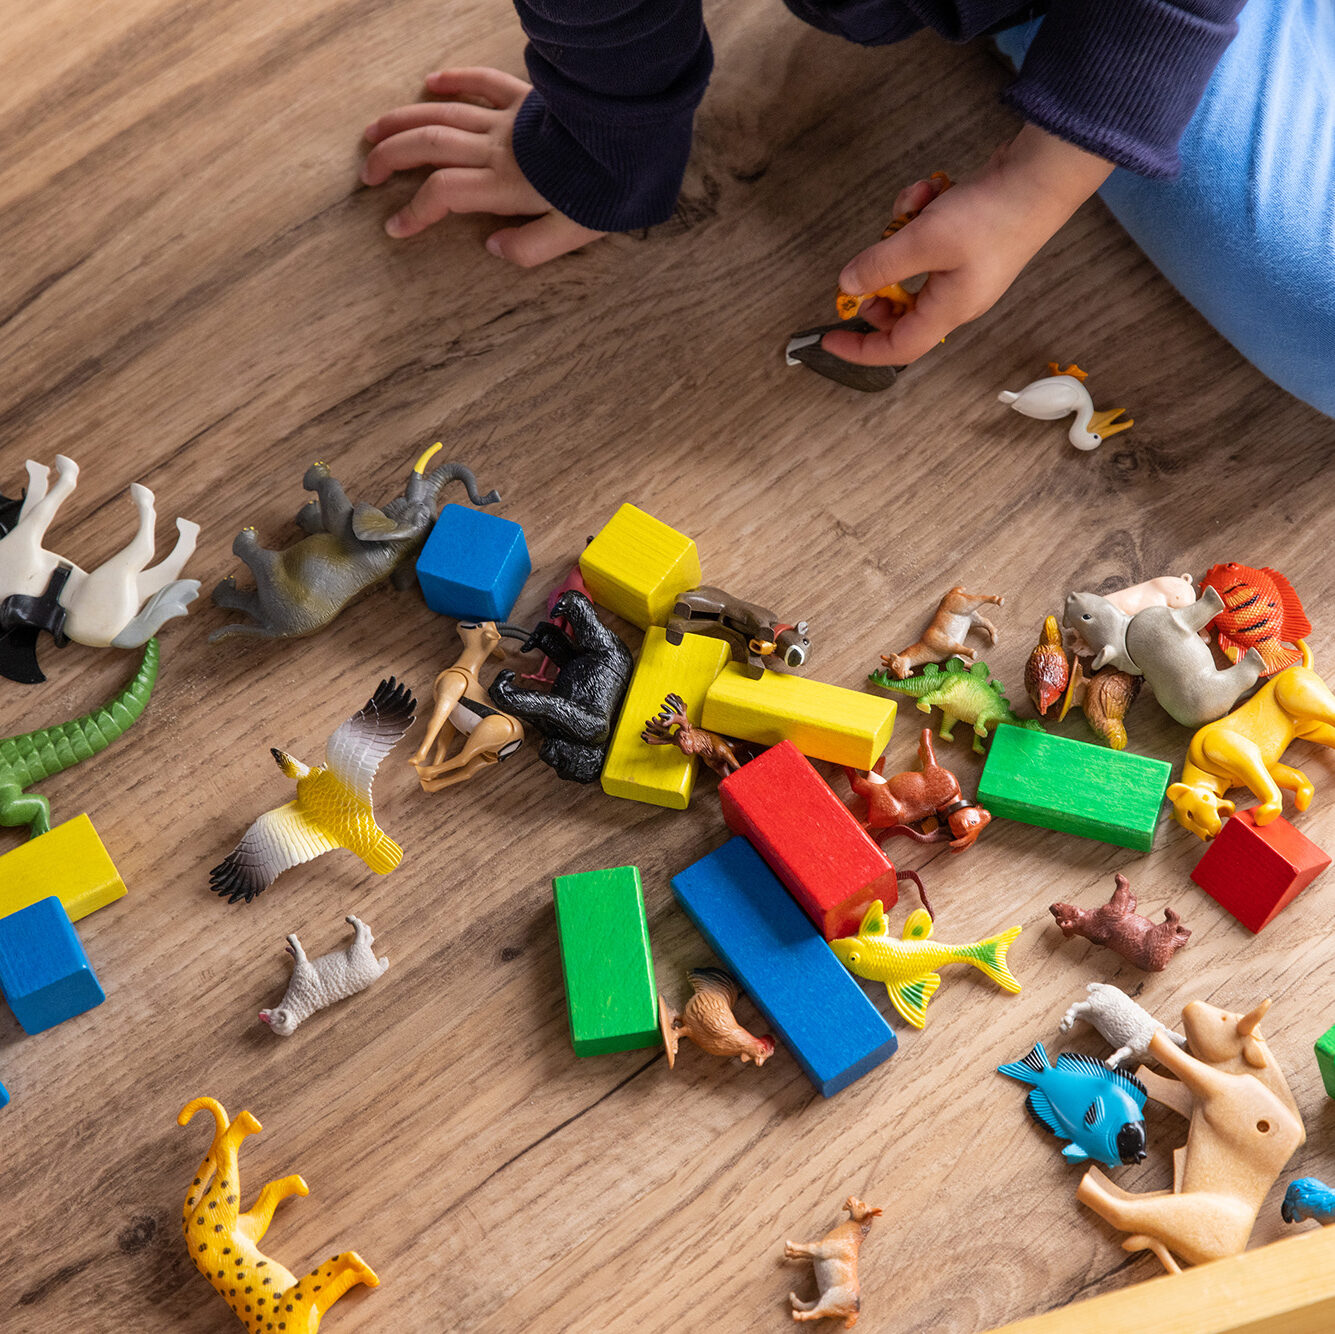 The way a child plays with the toys can give insight into their internal state of being.